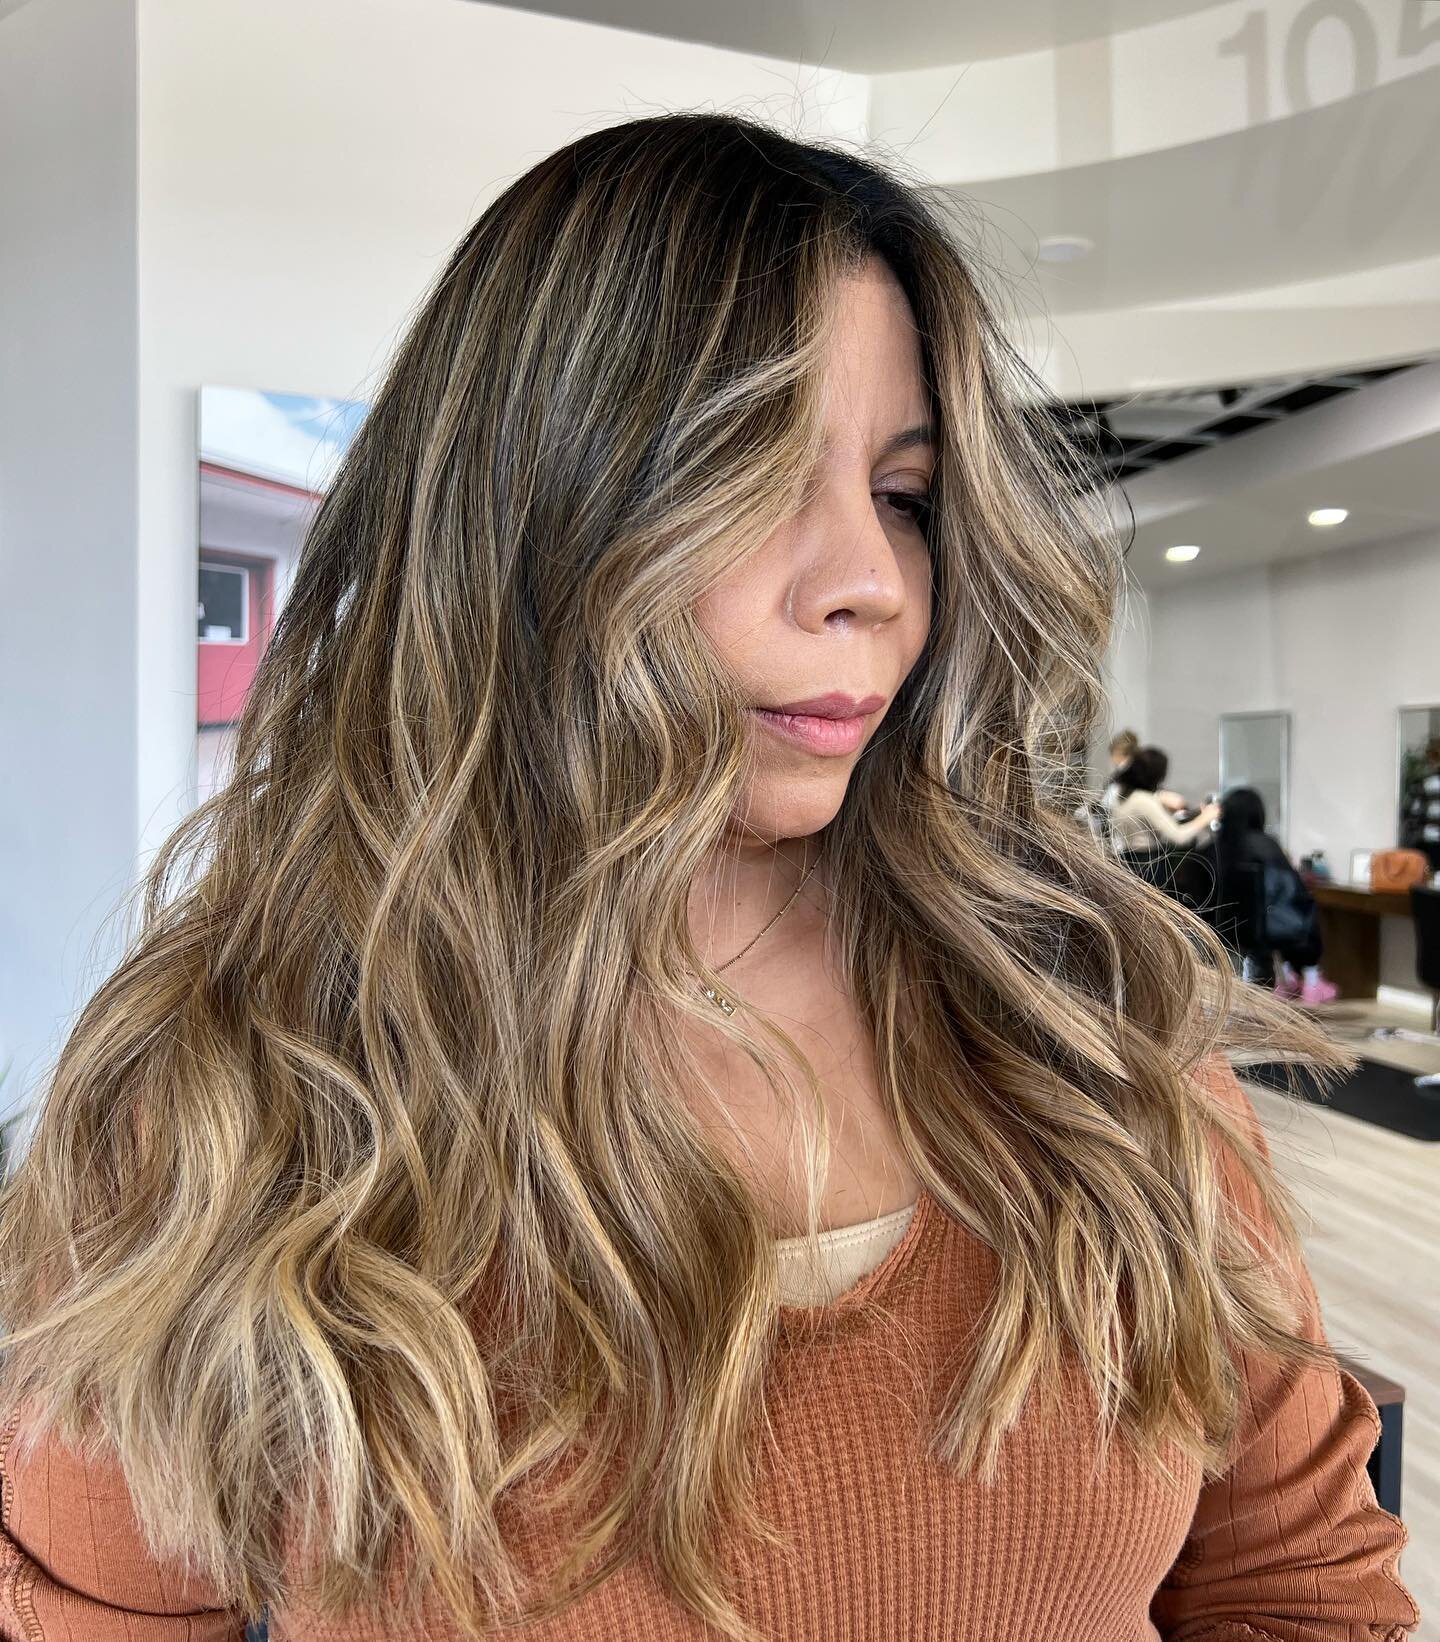 Happiness is getting your hair done &hellip;PERIOD 
#dimensionalcolor #livedinhair #elpasohairstylist